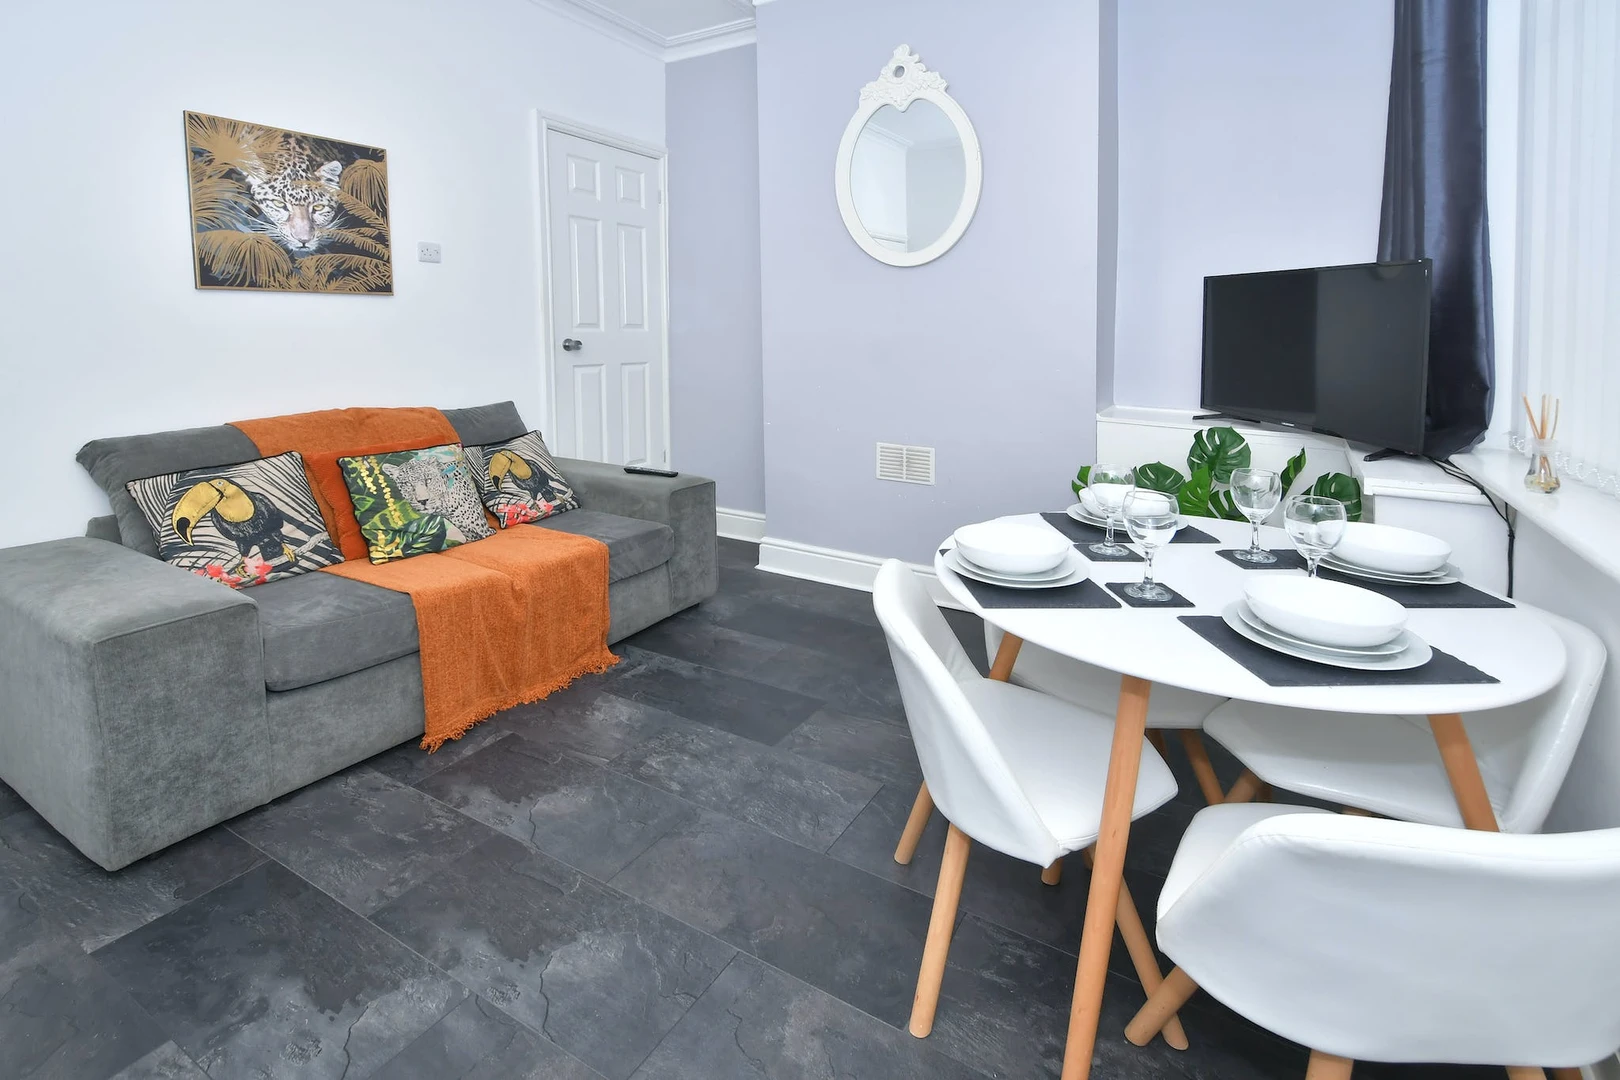 Accommodation in the centre of Stoke-on-trent